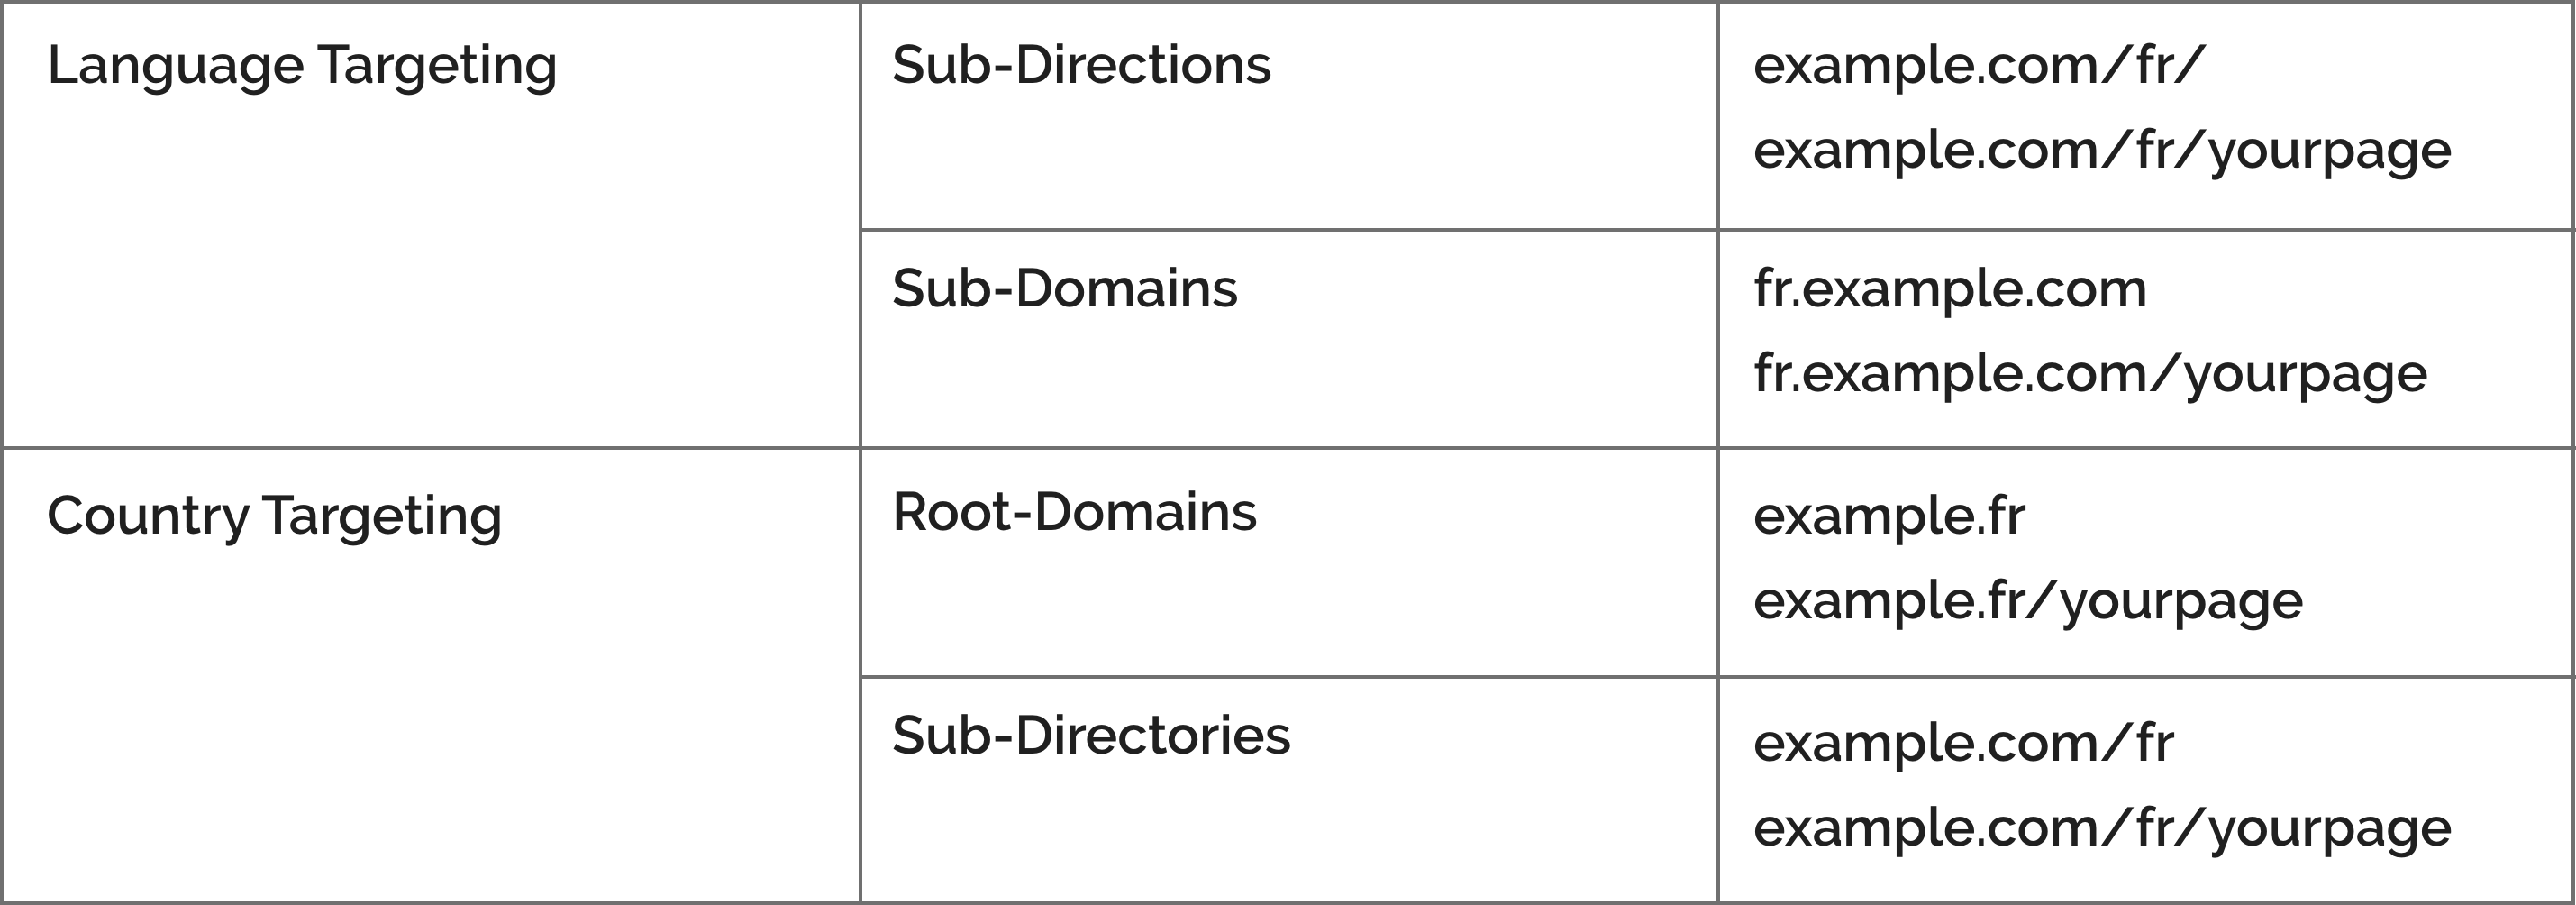 A table showing the different way to structure website URLs for international websites